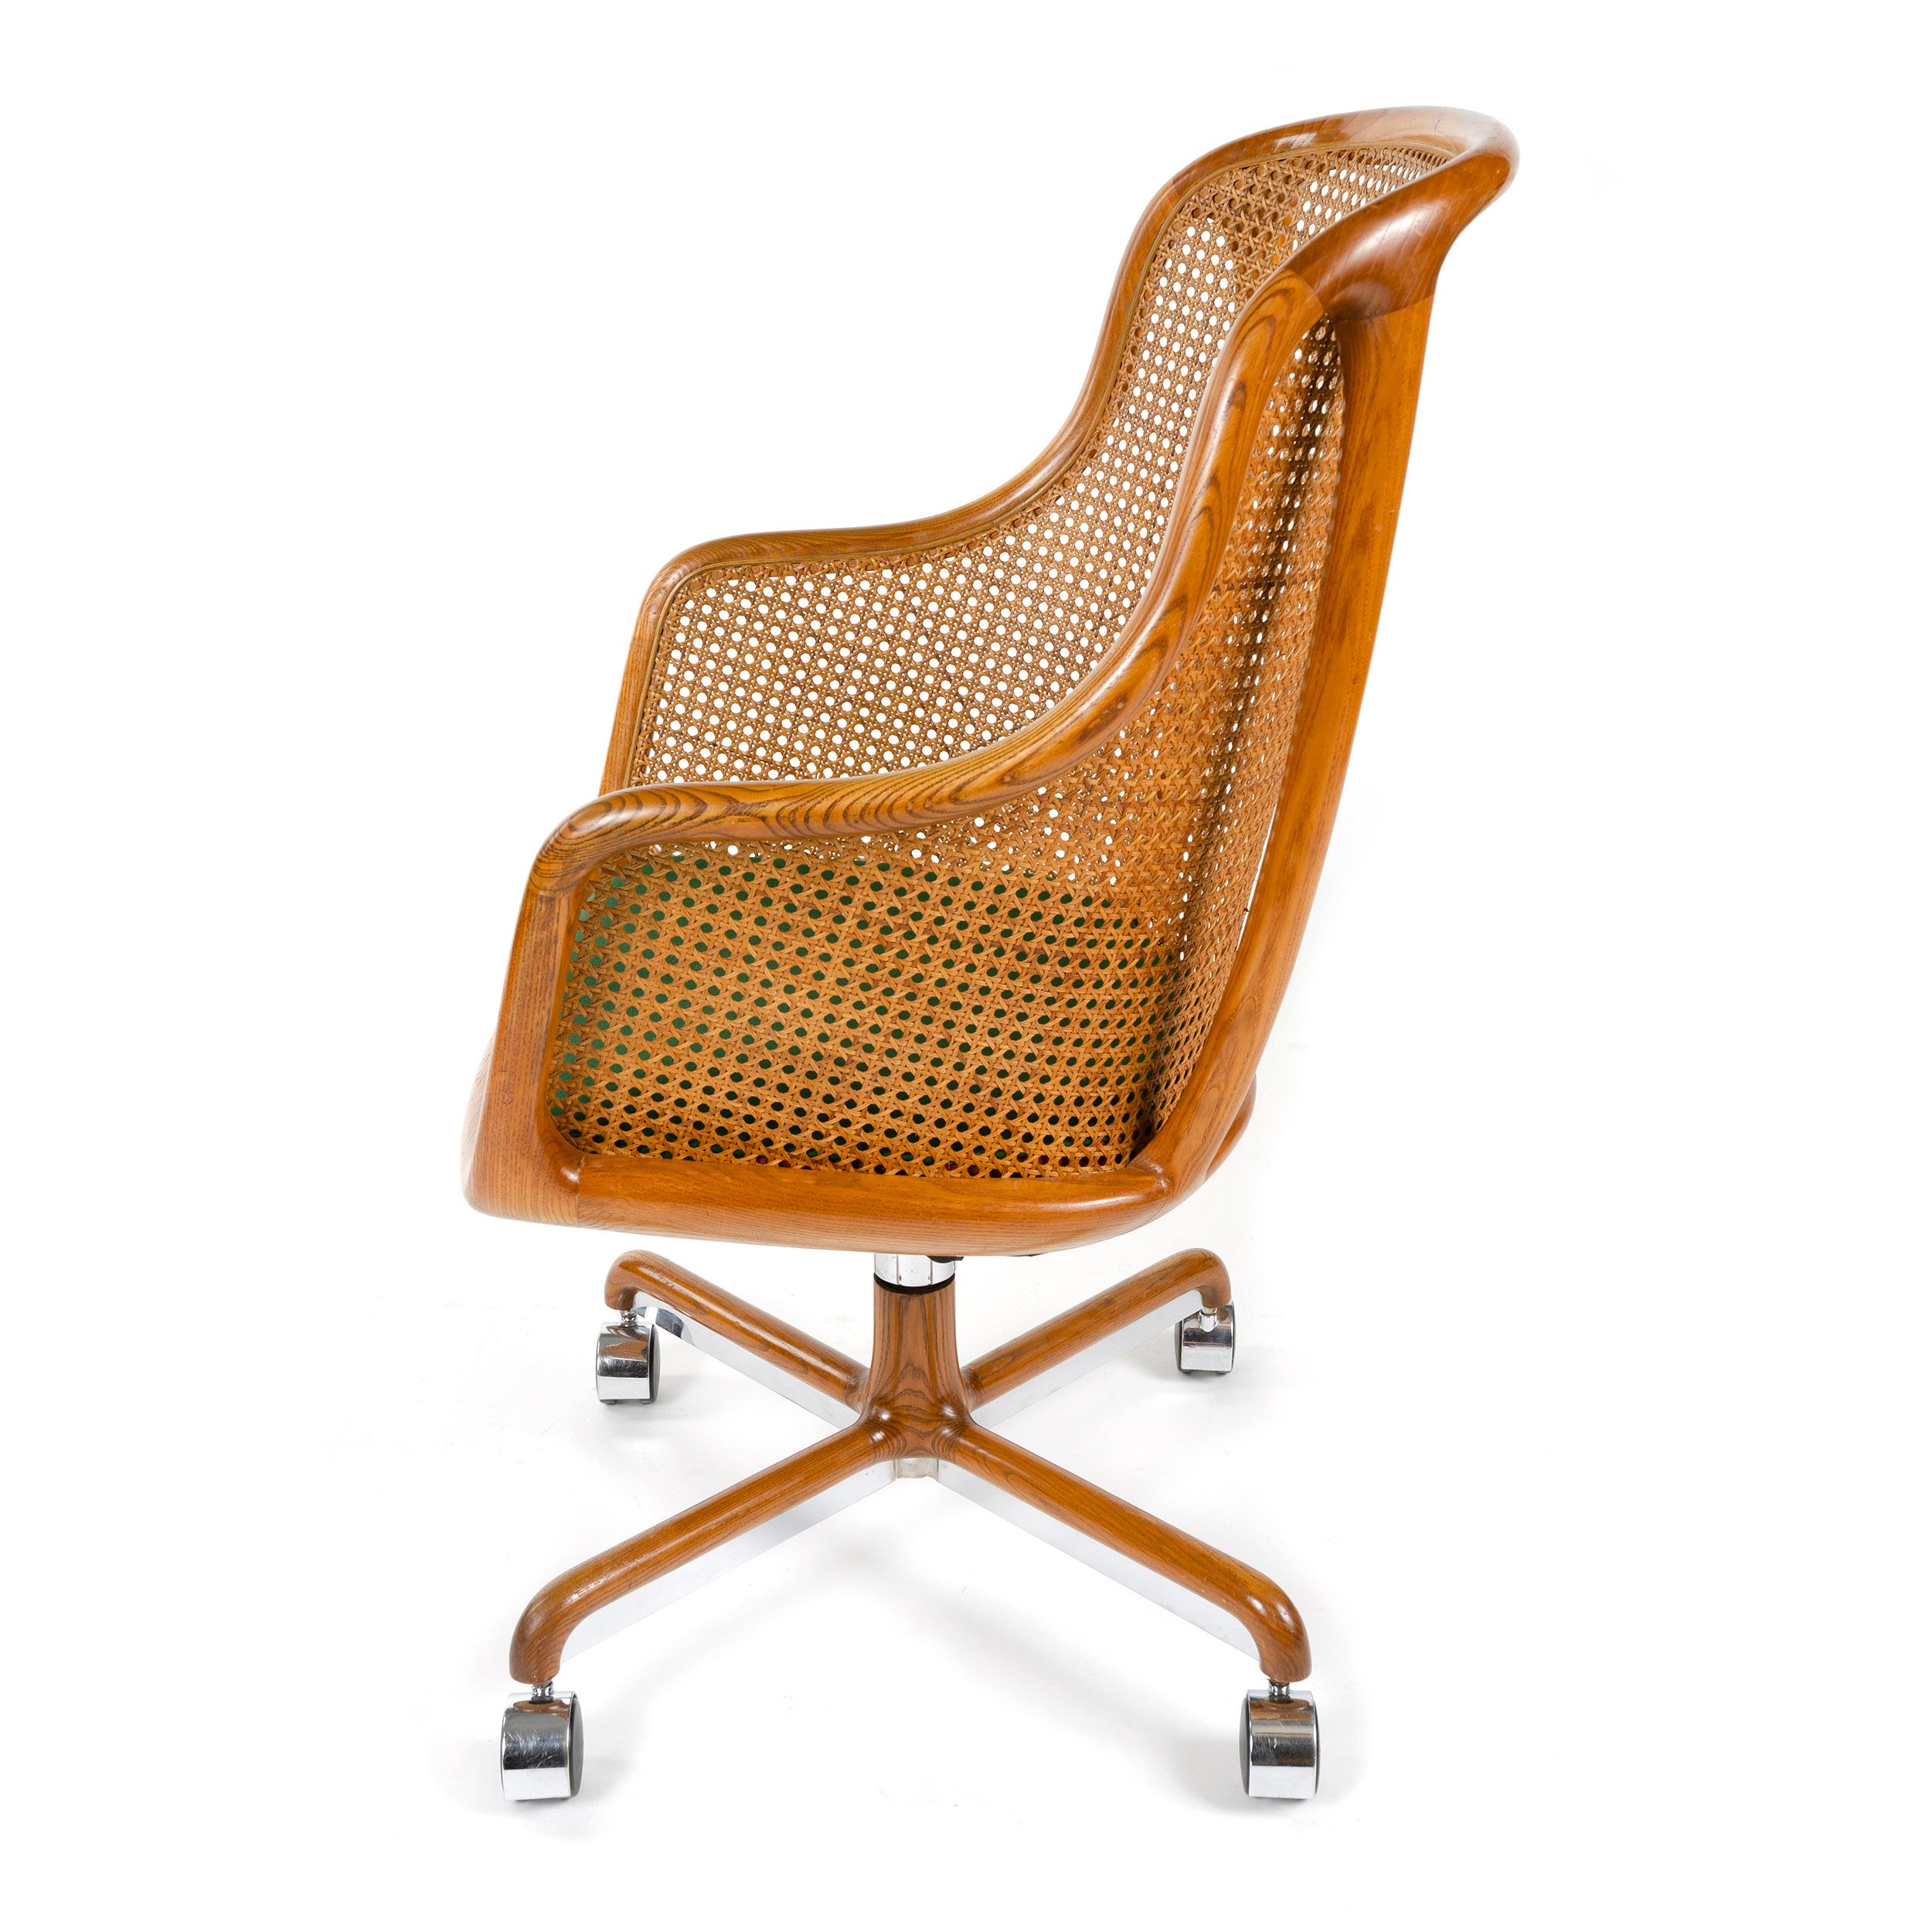 A highback desk chair with ash wood frame with caned back and arm, upholstered seat cushion on casters. Designed by Ward Bennett for Brickel Associates in the 1960s.
Please note: seat cushion might differ from image.